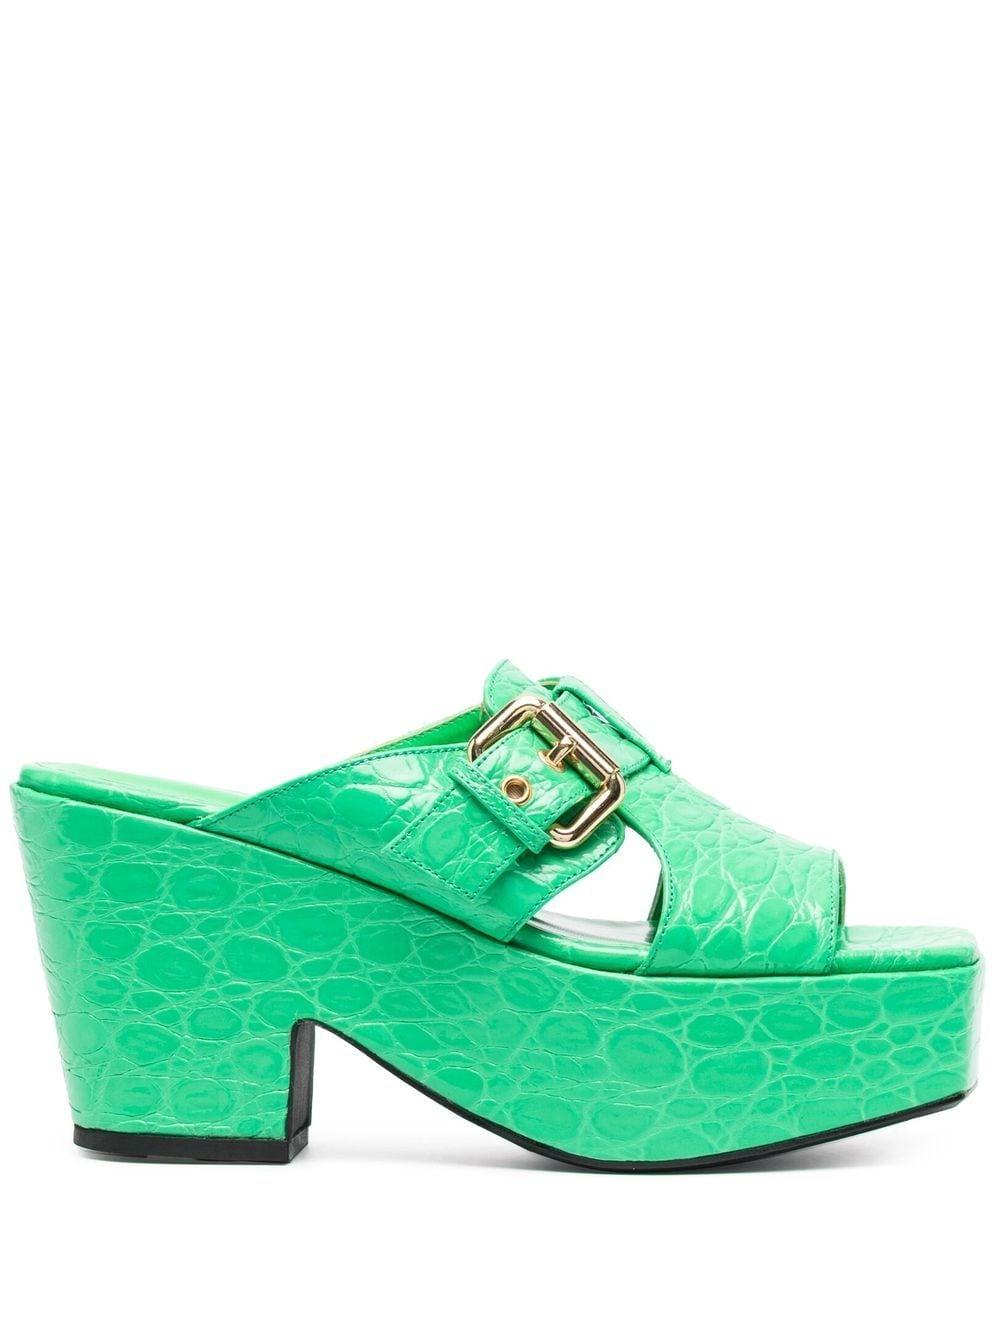 BY FAR Lenka Leather Sandals in Green Womens Shoes Heels Wedge sandals 